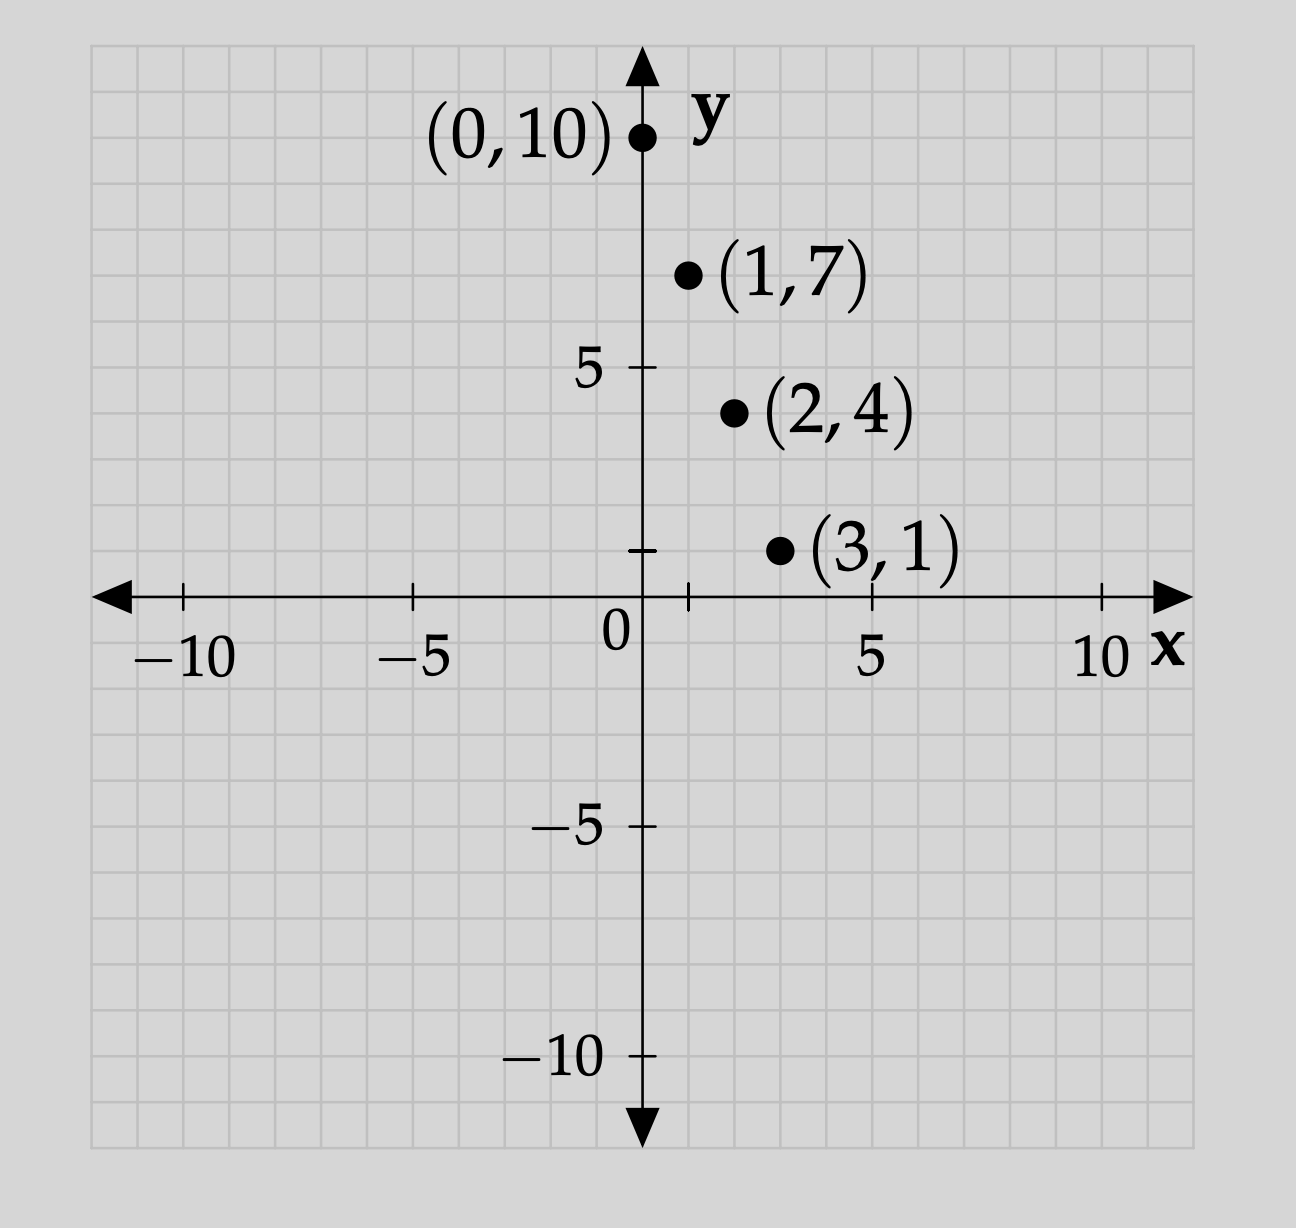 Ordered pairs graphed on xy-plane